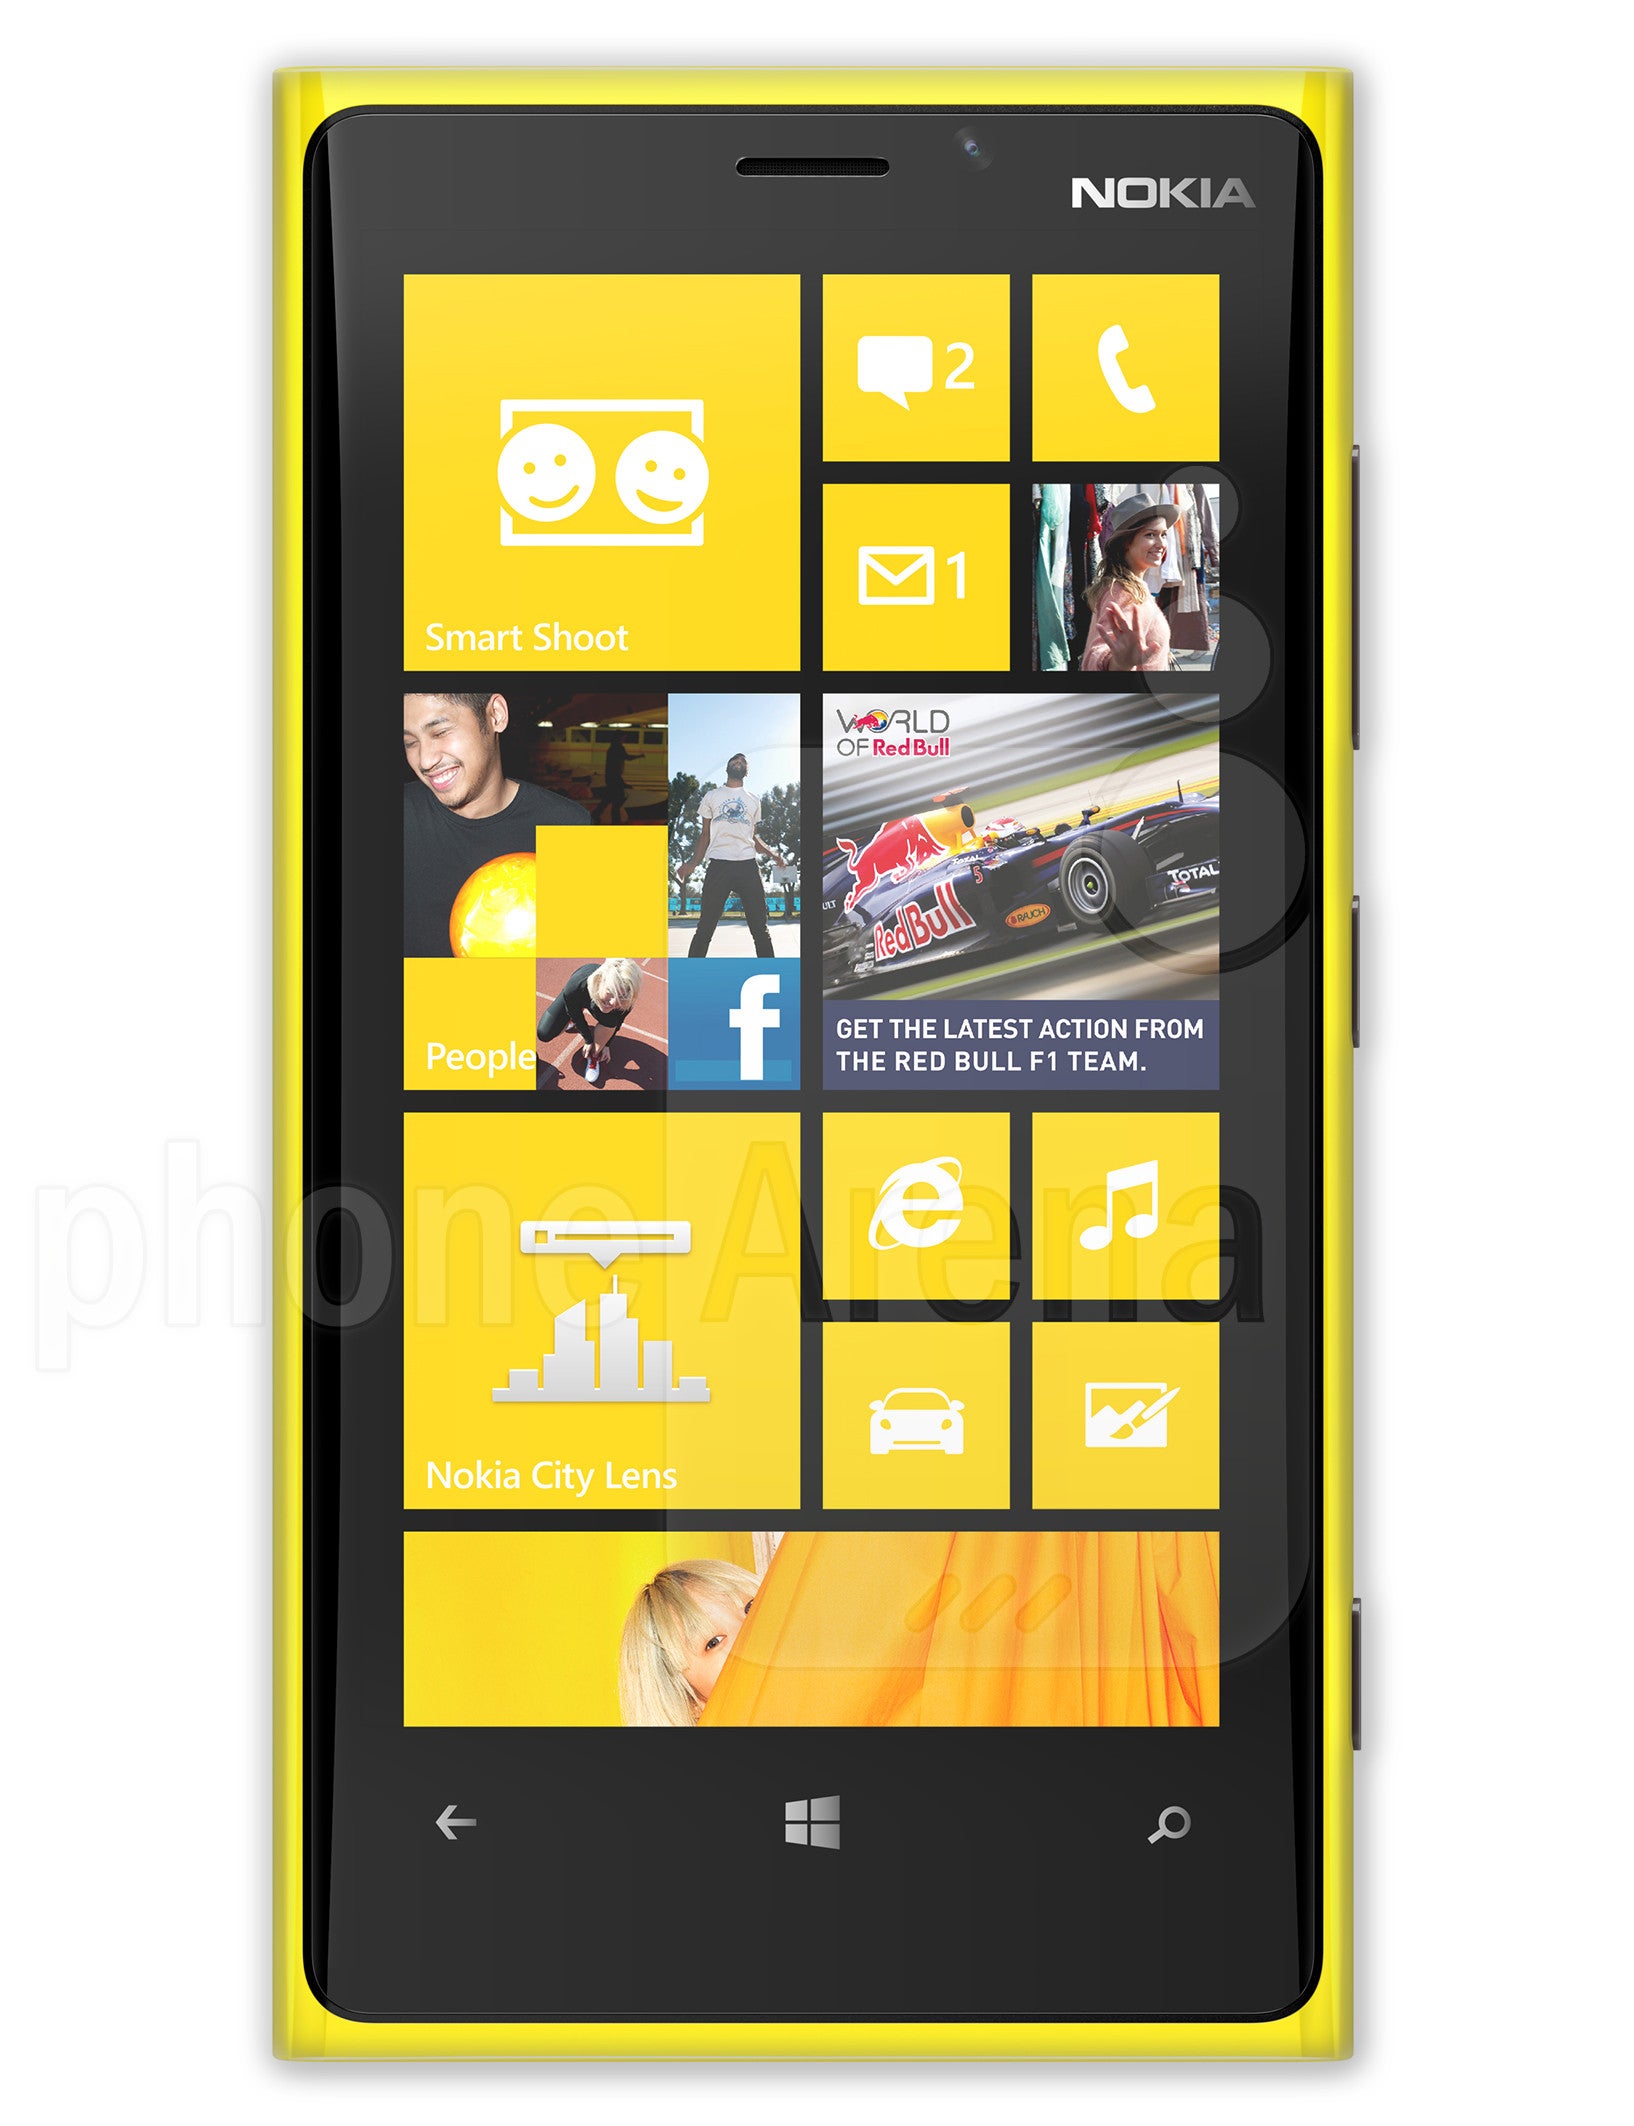 The Nokia Lumia 920 - "Hello", here's an AT&T ad that shows off three versions of its exclusive Nokia Lumia 920